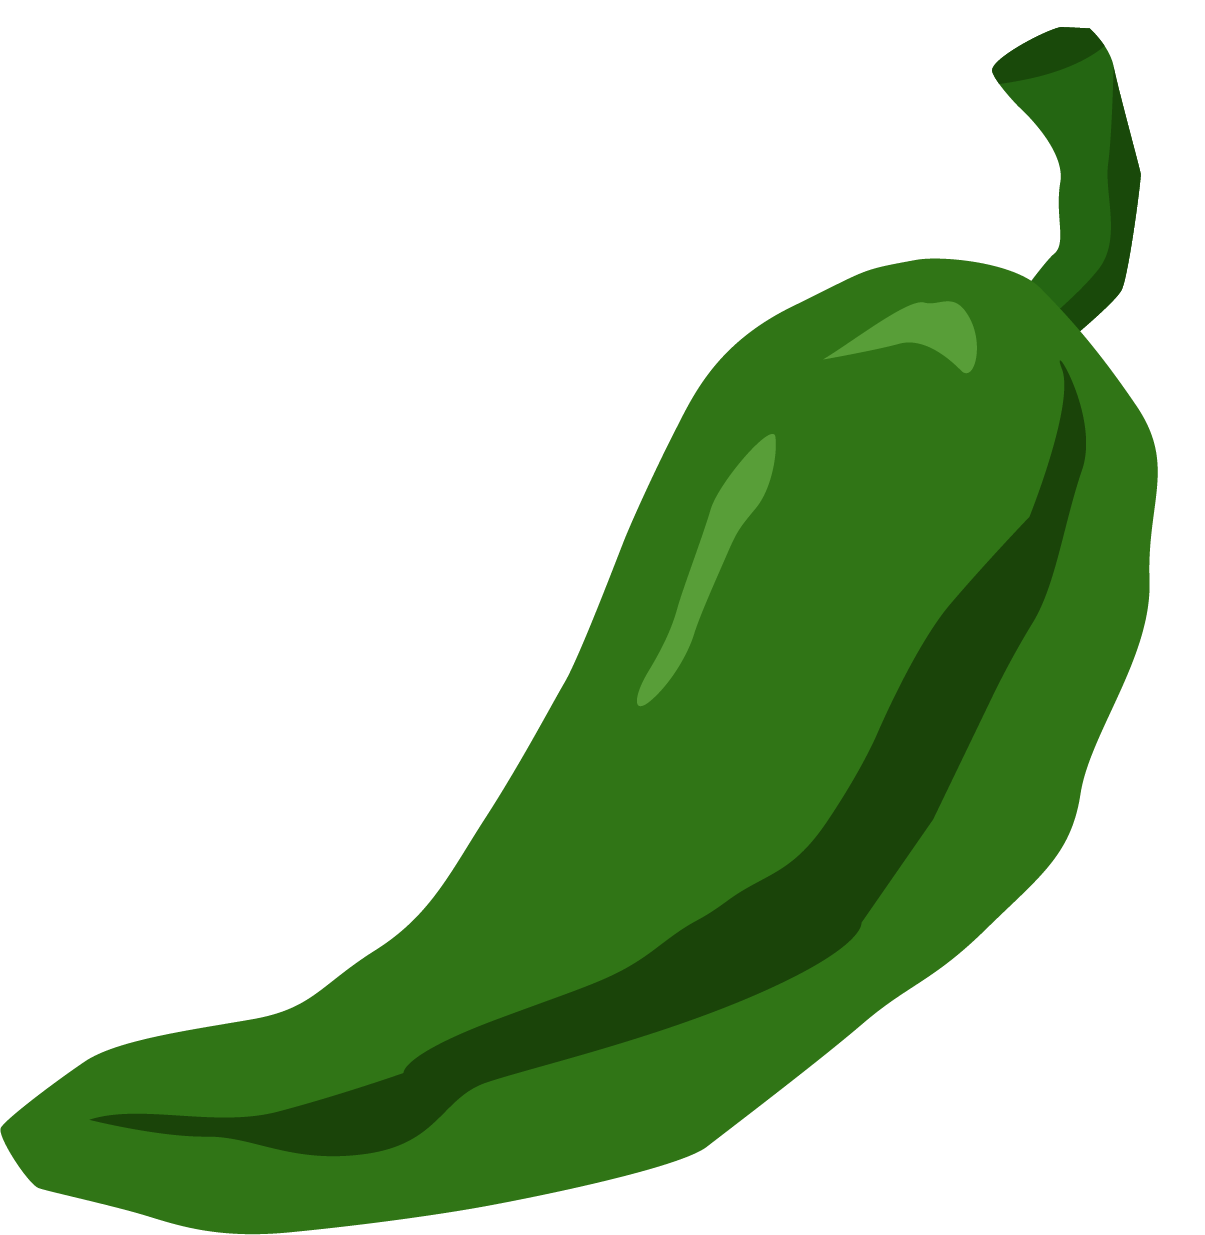 GreenChile.png